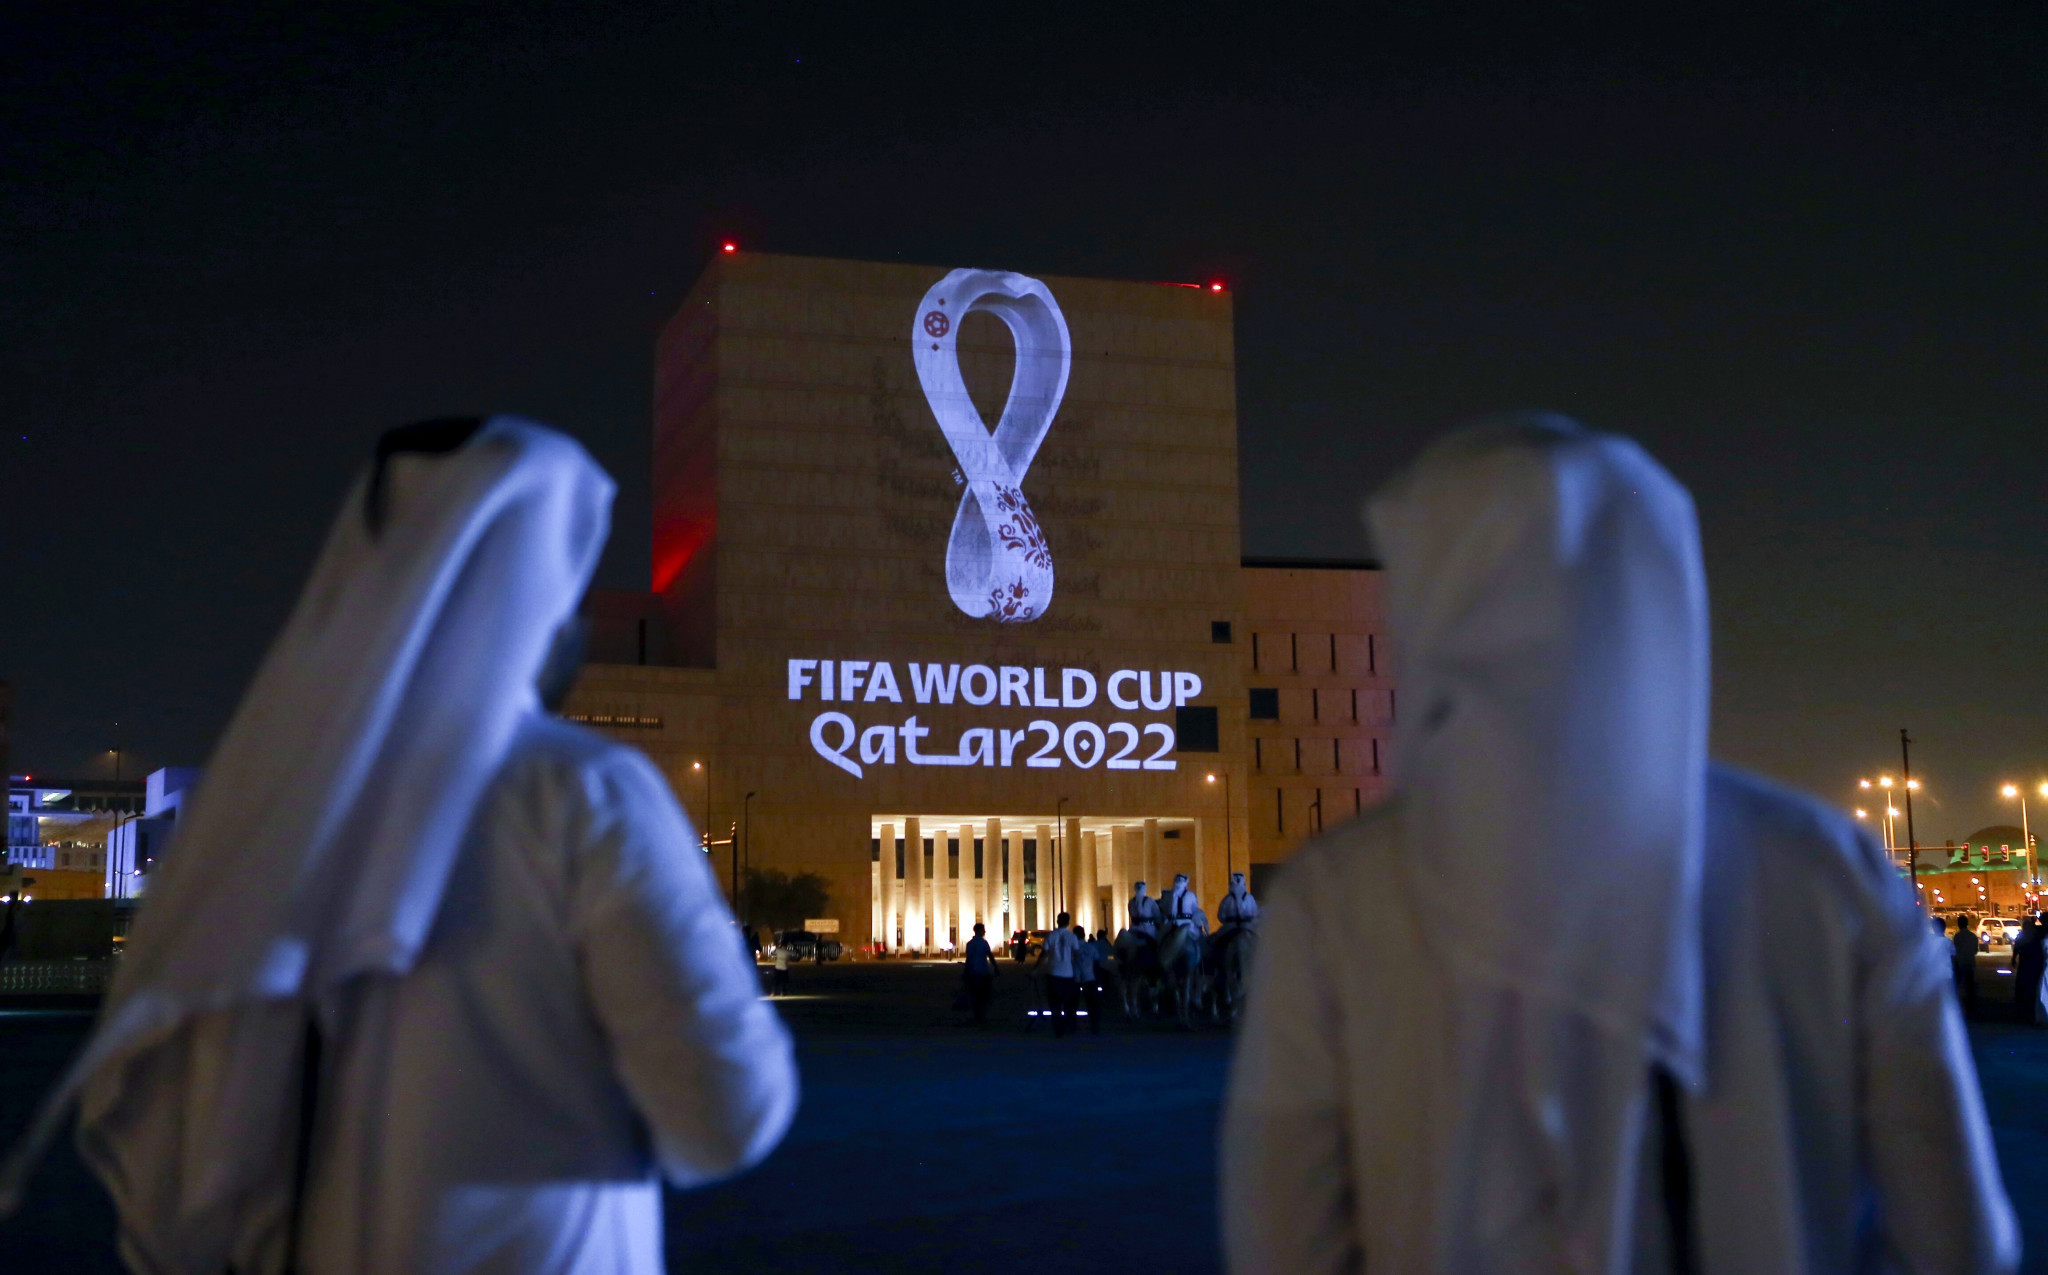 Survey reveals fans want FIFA to compensate Qatar's migrant workers